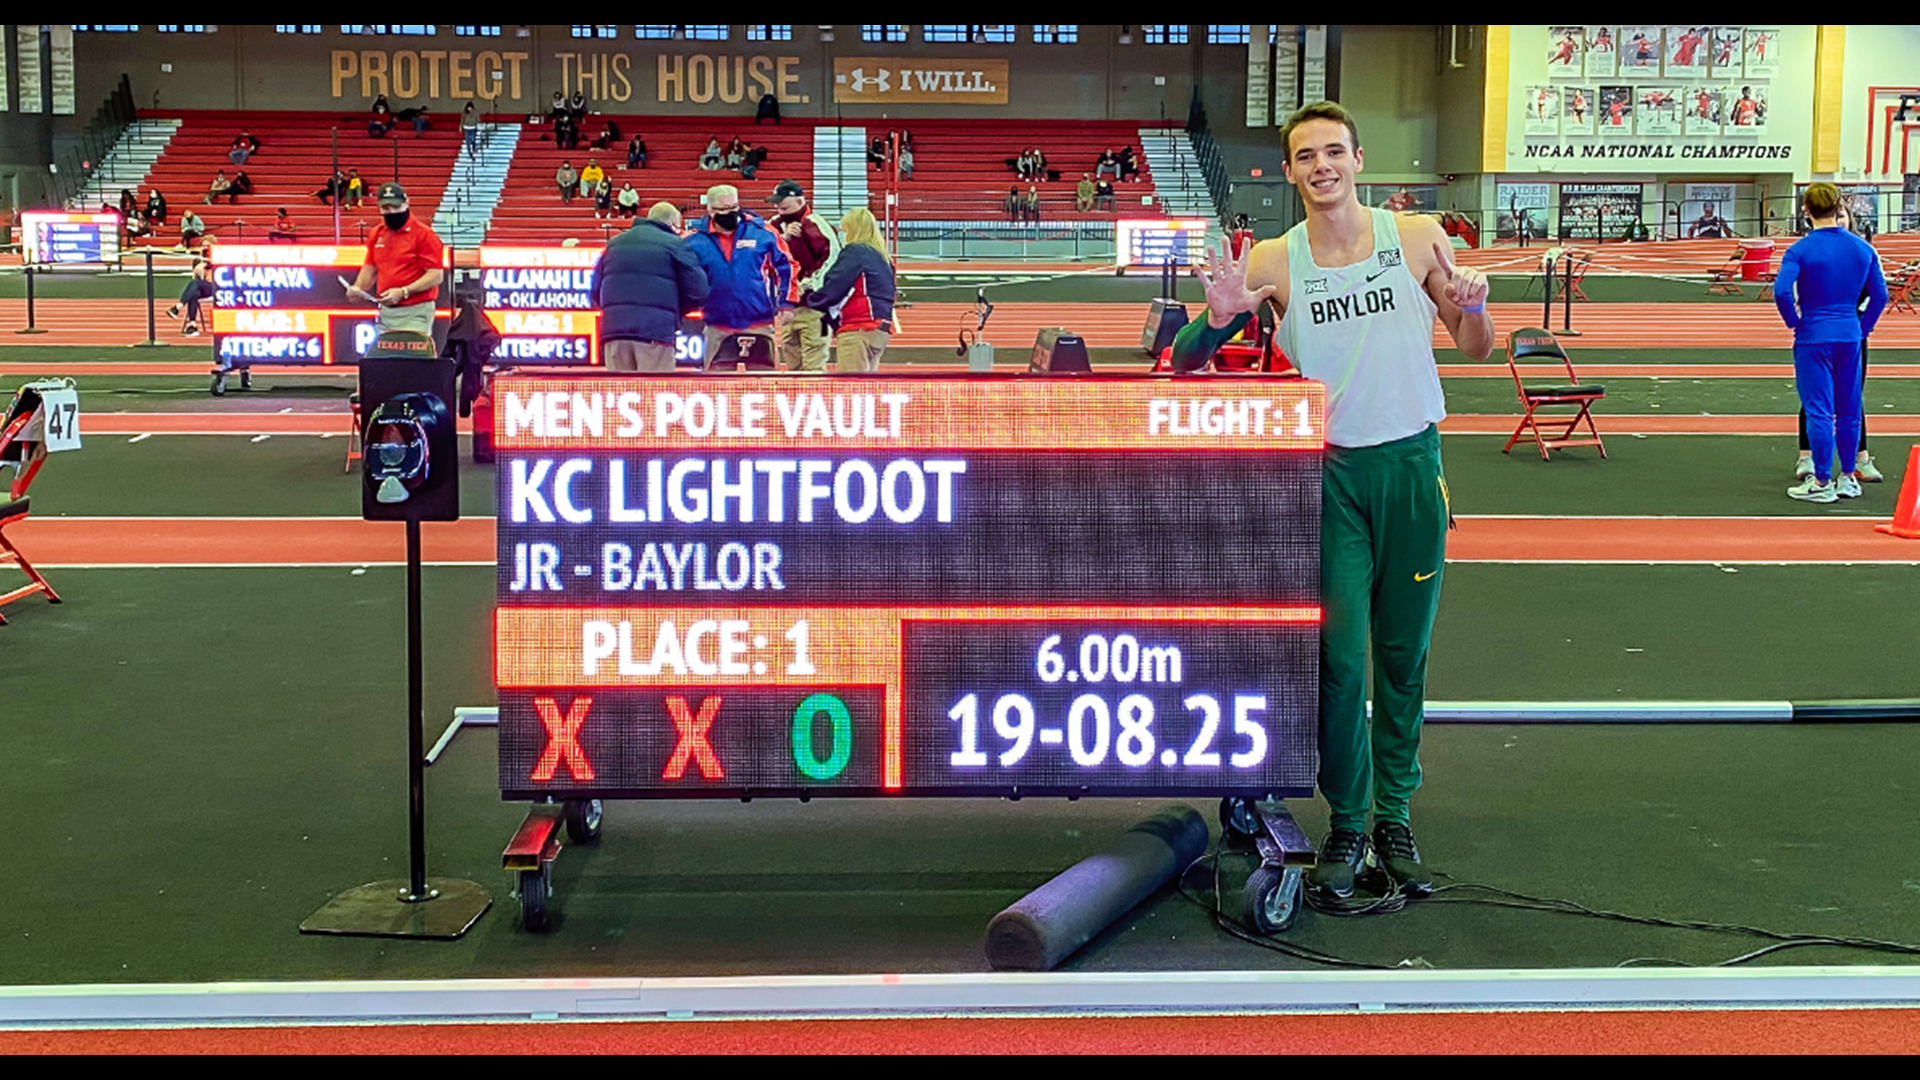 KC Lightfoot became the first collegiate pole vaulter to jump 6 meters. He still has more in his tank